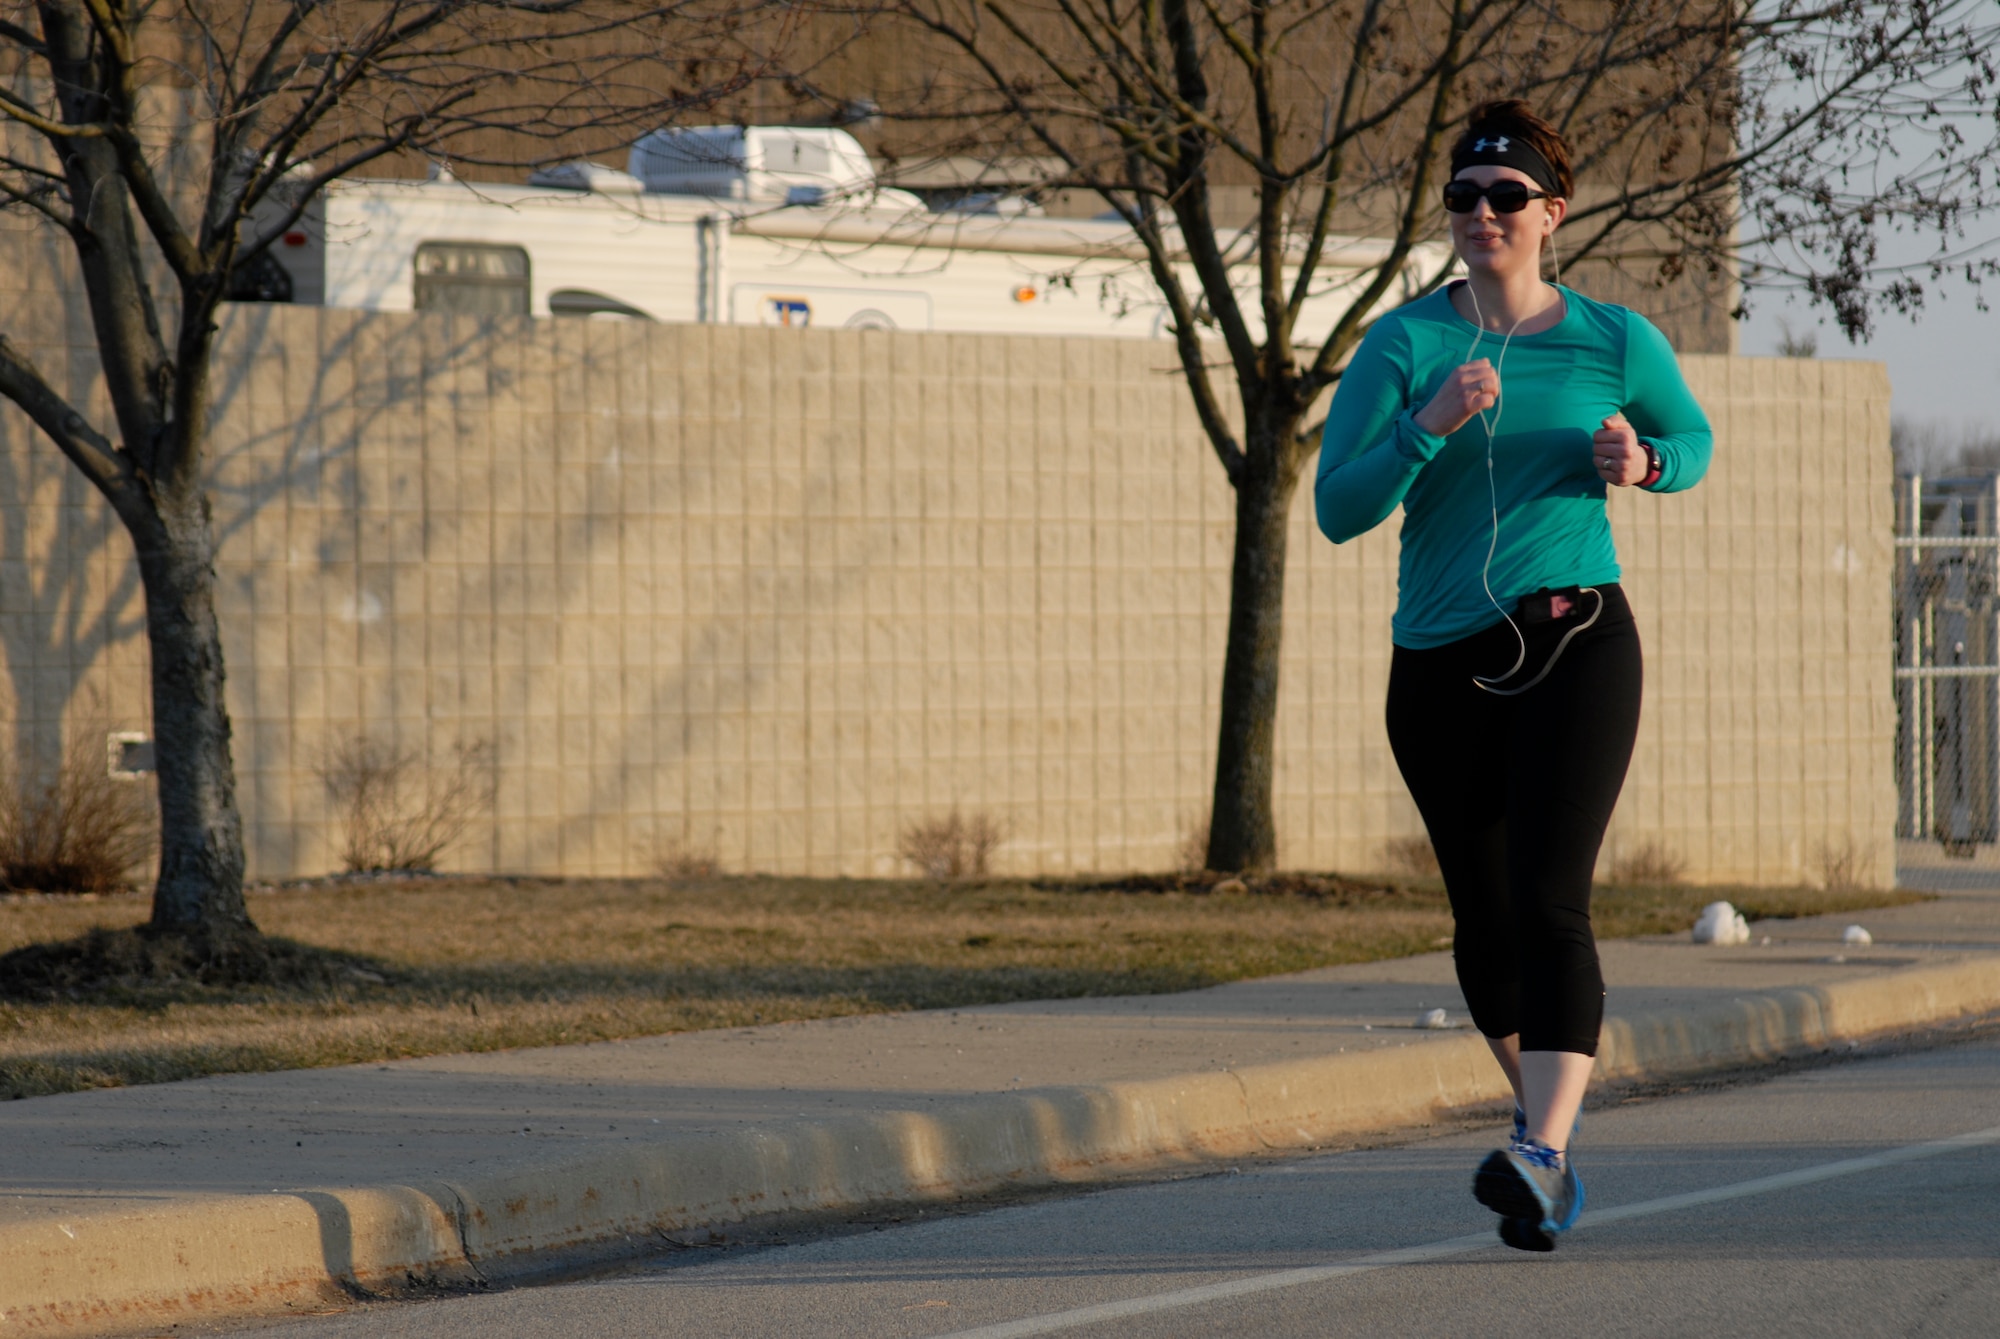 U.S. Army Sgt. Krysta Theobald runs one of five miles during the second annual Tactical Air Control Party Association 24 Hour Run Challenge at the 182nd Airlift Wing in Peoria, Ill., March 28, 2013.  Sixty-two runners ran 161.75 miles around the installation over the course of 24 hours and raised over $8,200 in support of the TACP community and their families.  The 182nd team also ran in remembrance of Staff Sgt. Jacob Frazier, a member of the Peoria-based 169th Air Support Operations Squadron who was killed in action near Geresk, Afghanistan, 10 years earlier on March 29, 2003.  (U.S. Air Force photo by Staff Sgt. Lealan Buehrer//Released)